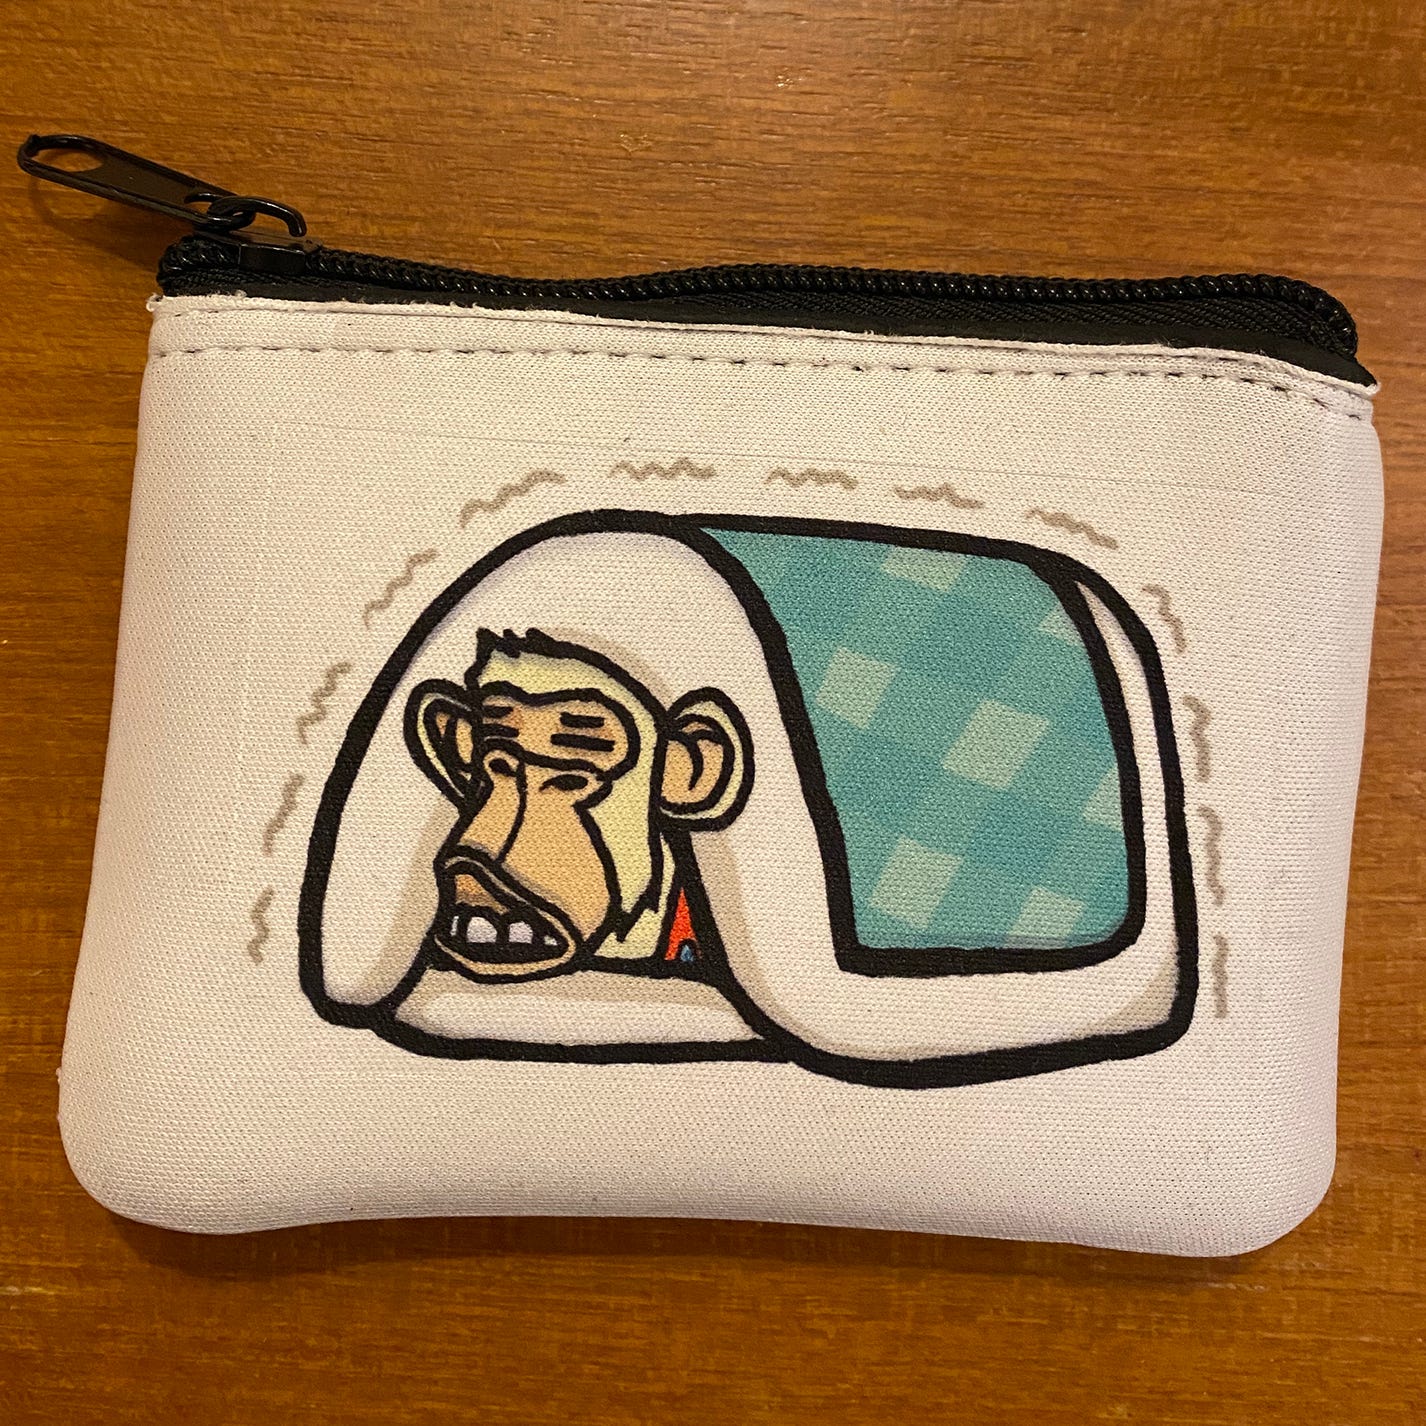 A real wallet, with an ape feeling really cold.